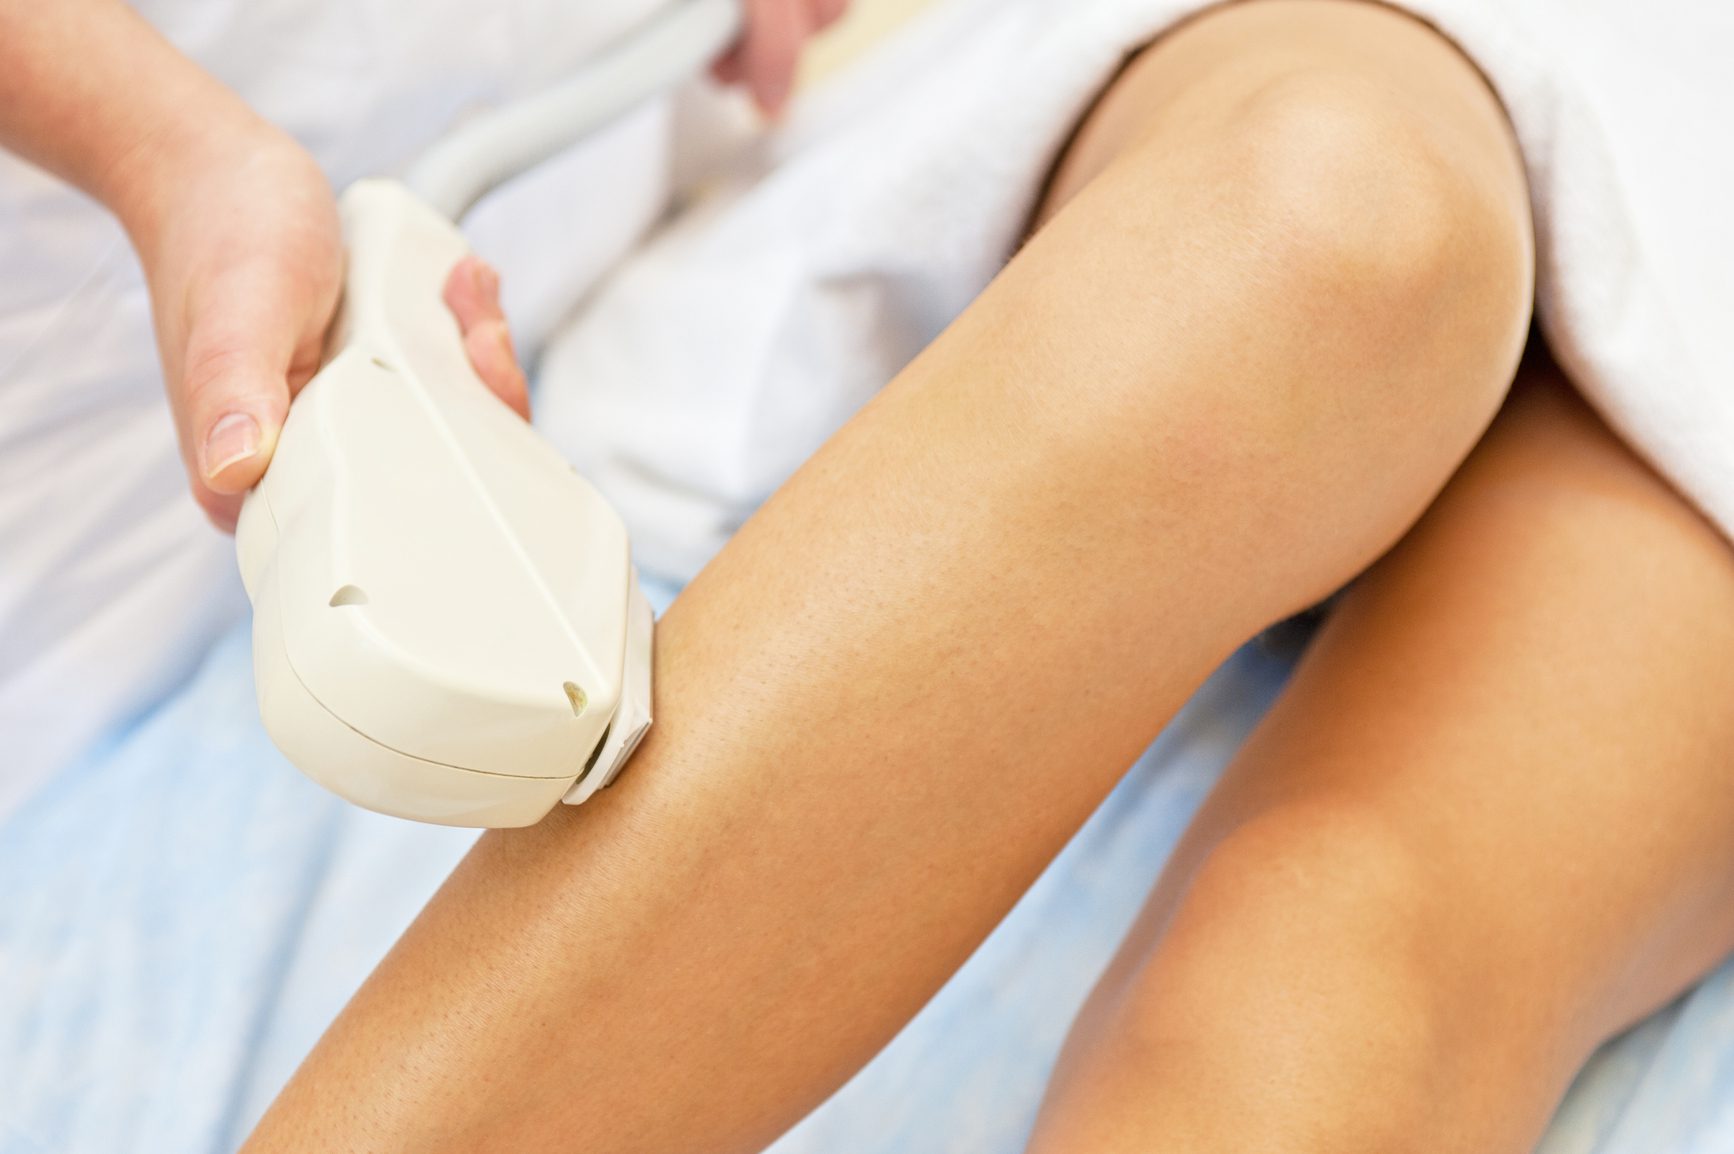 Get Laser Hair Removal in Plano TX Before Valentine's Day!